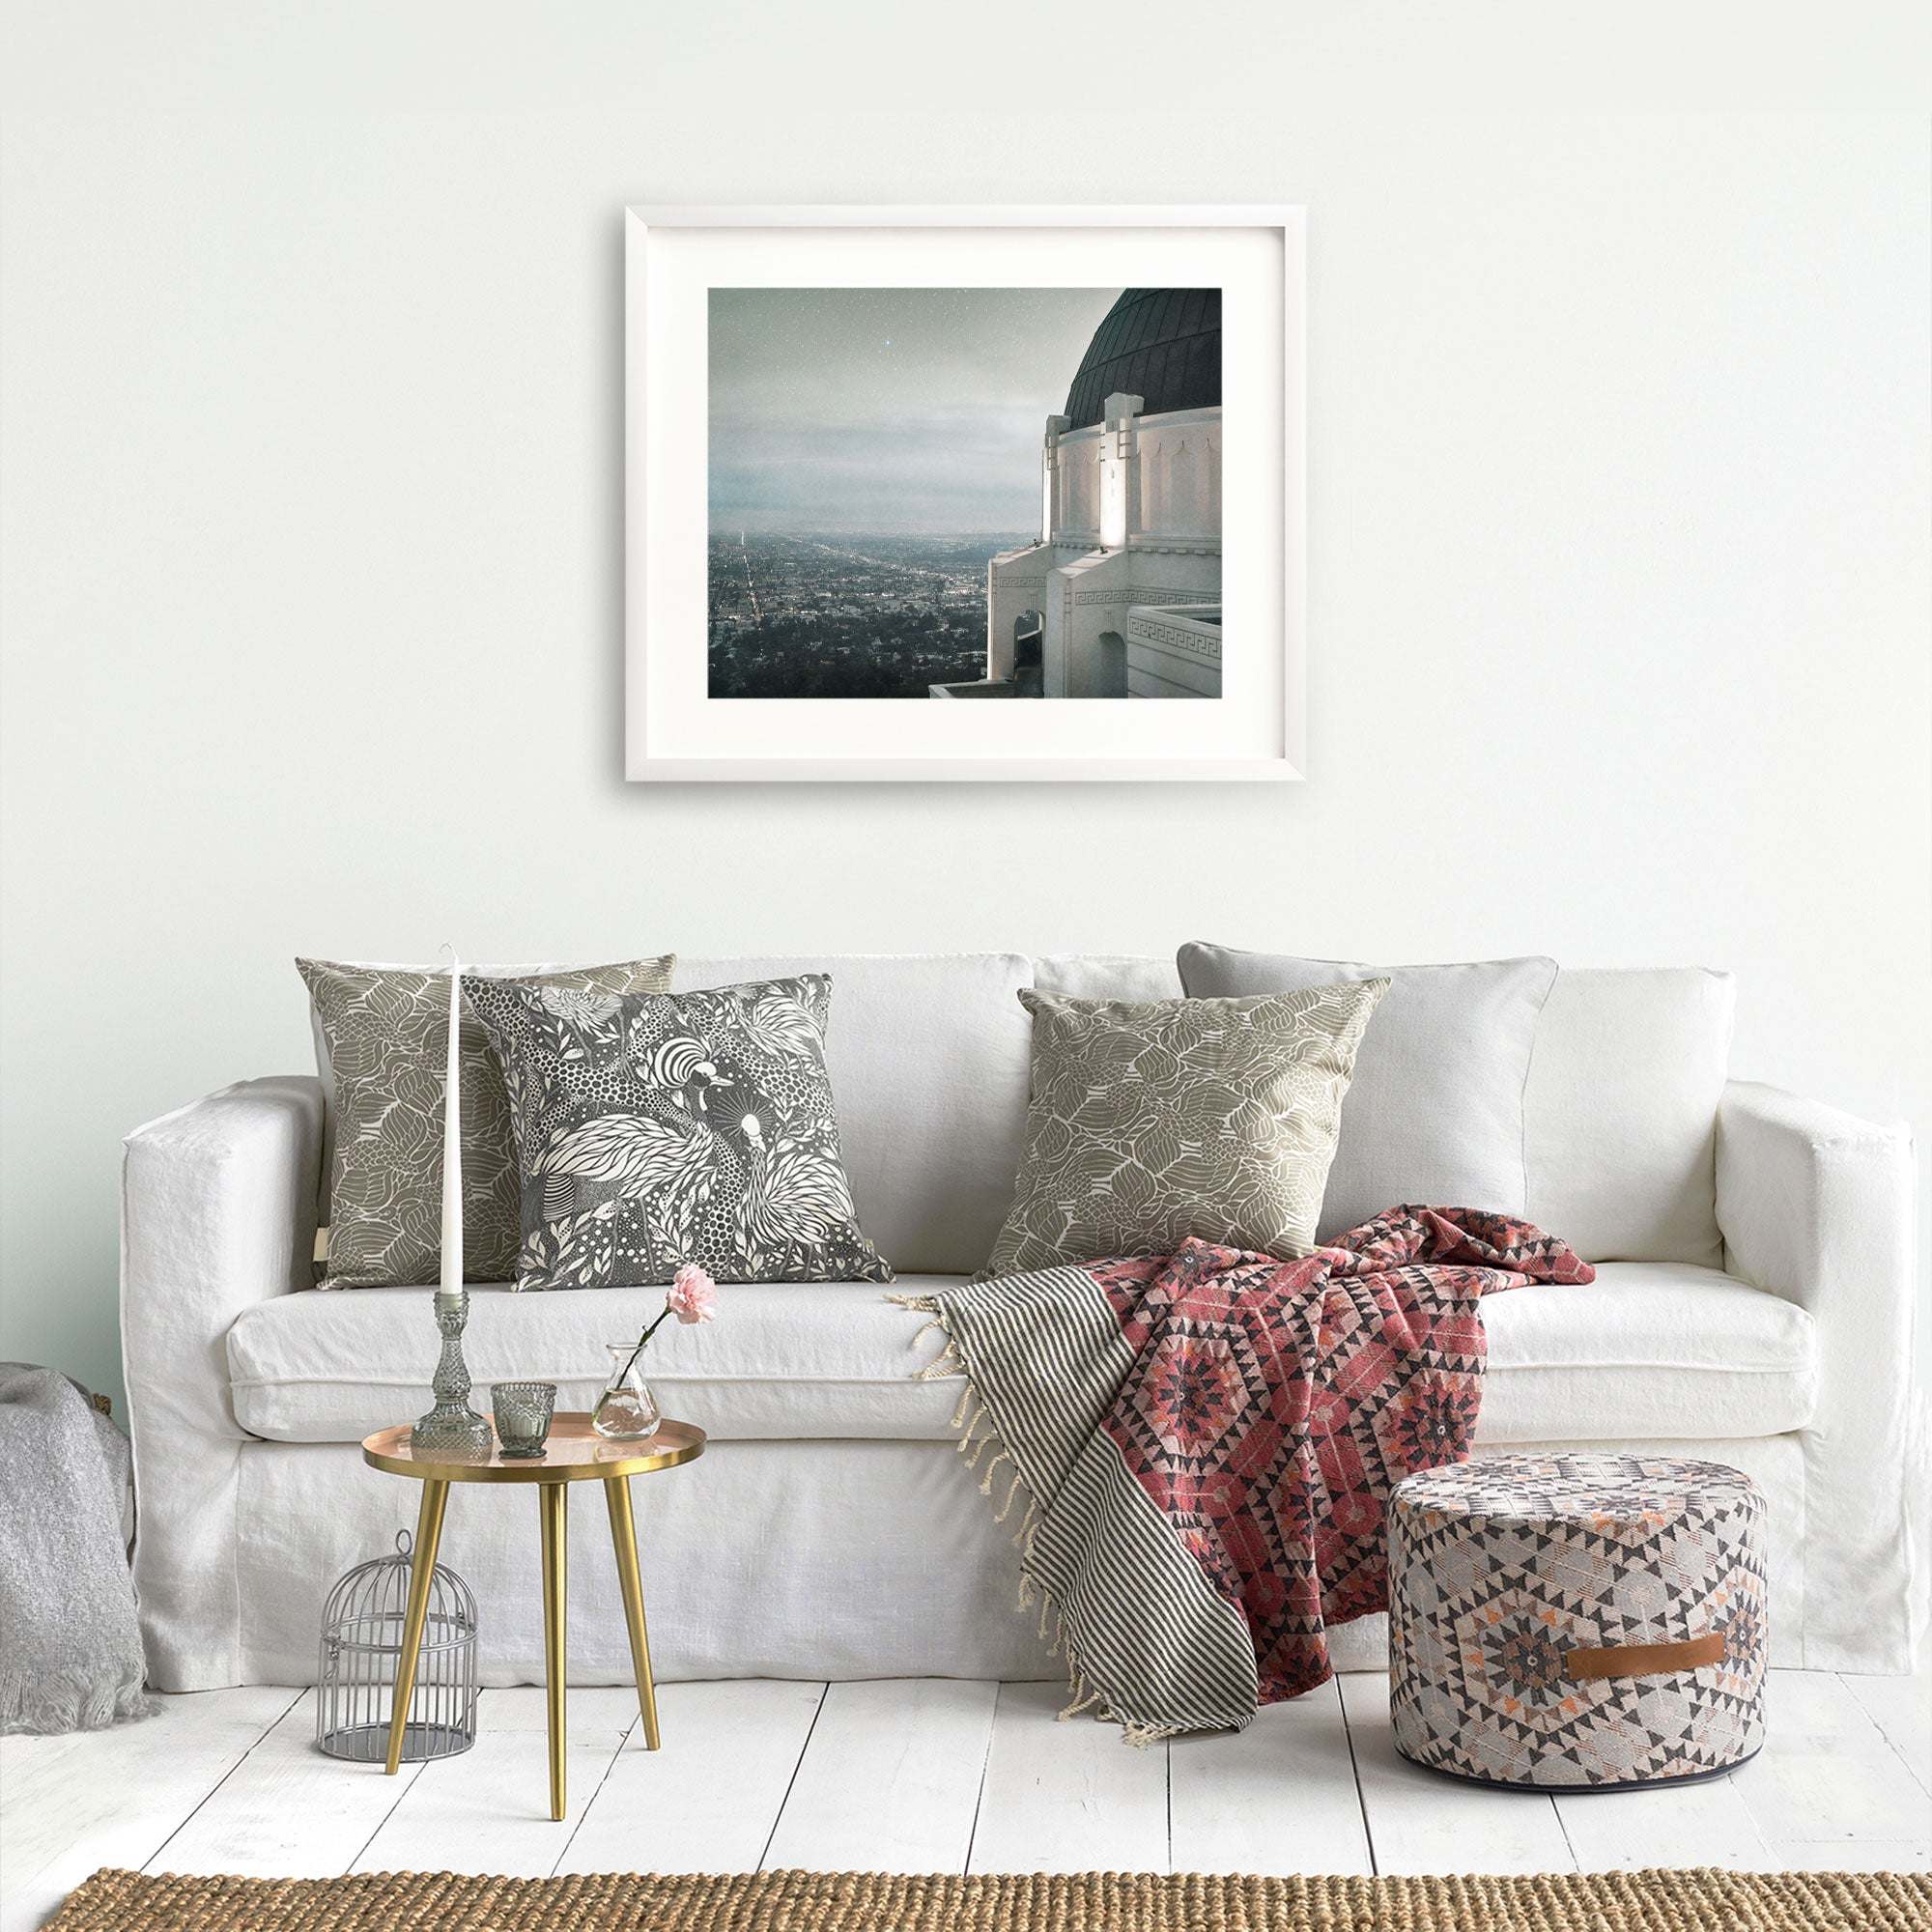 A minimalist living room featuring a white sofa adorned with patterned pillows, a small metallic side table with decor, a woven pouf, and an Offley Green archival photograph print of Griffith Observatory (&#39;The Sky At Night&#39;) hanging on the wall.